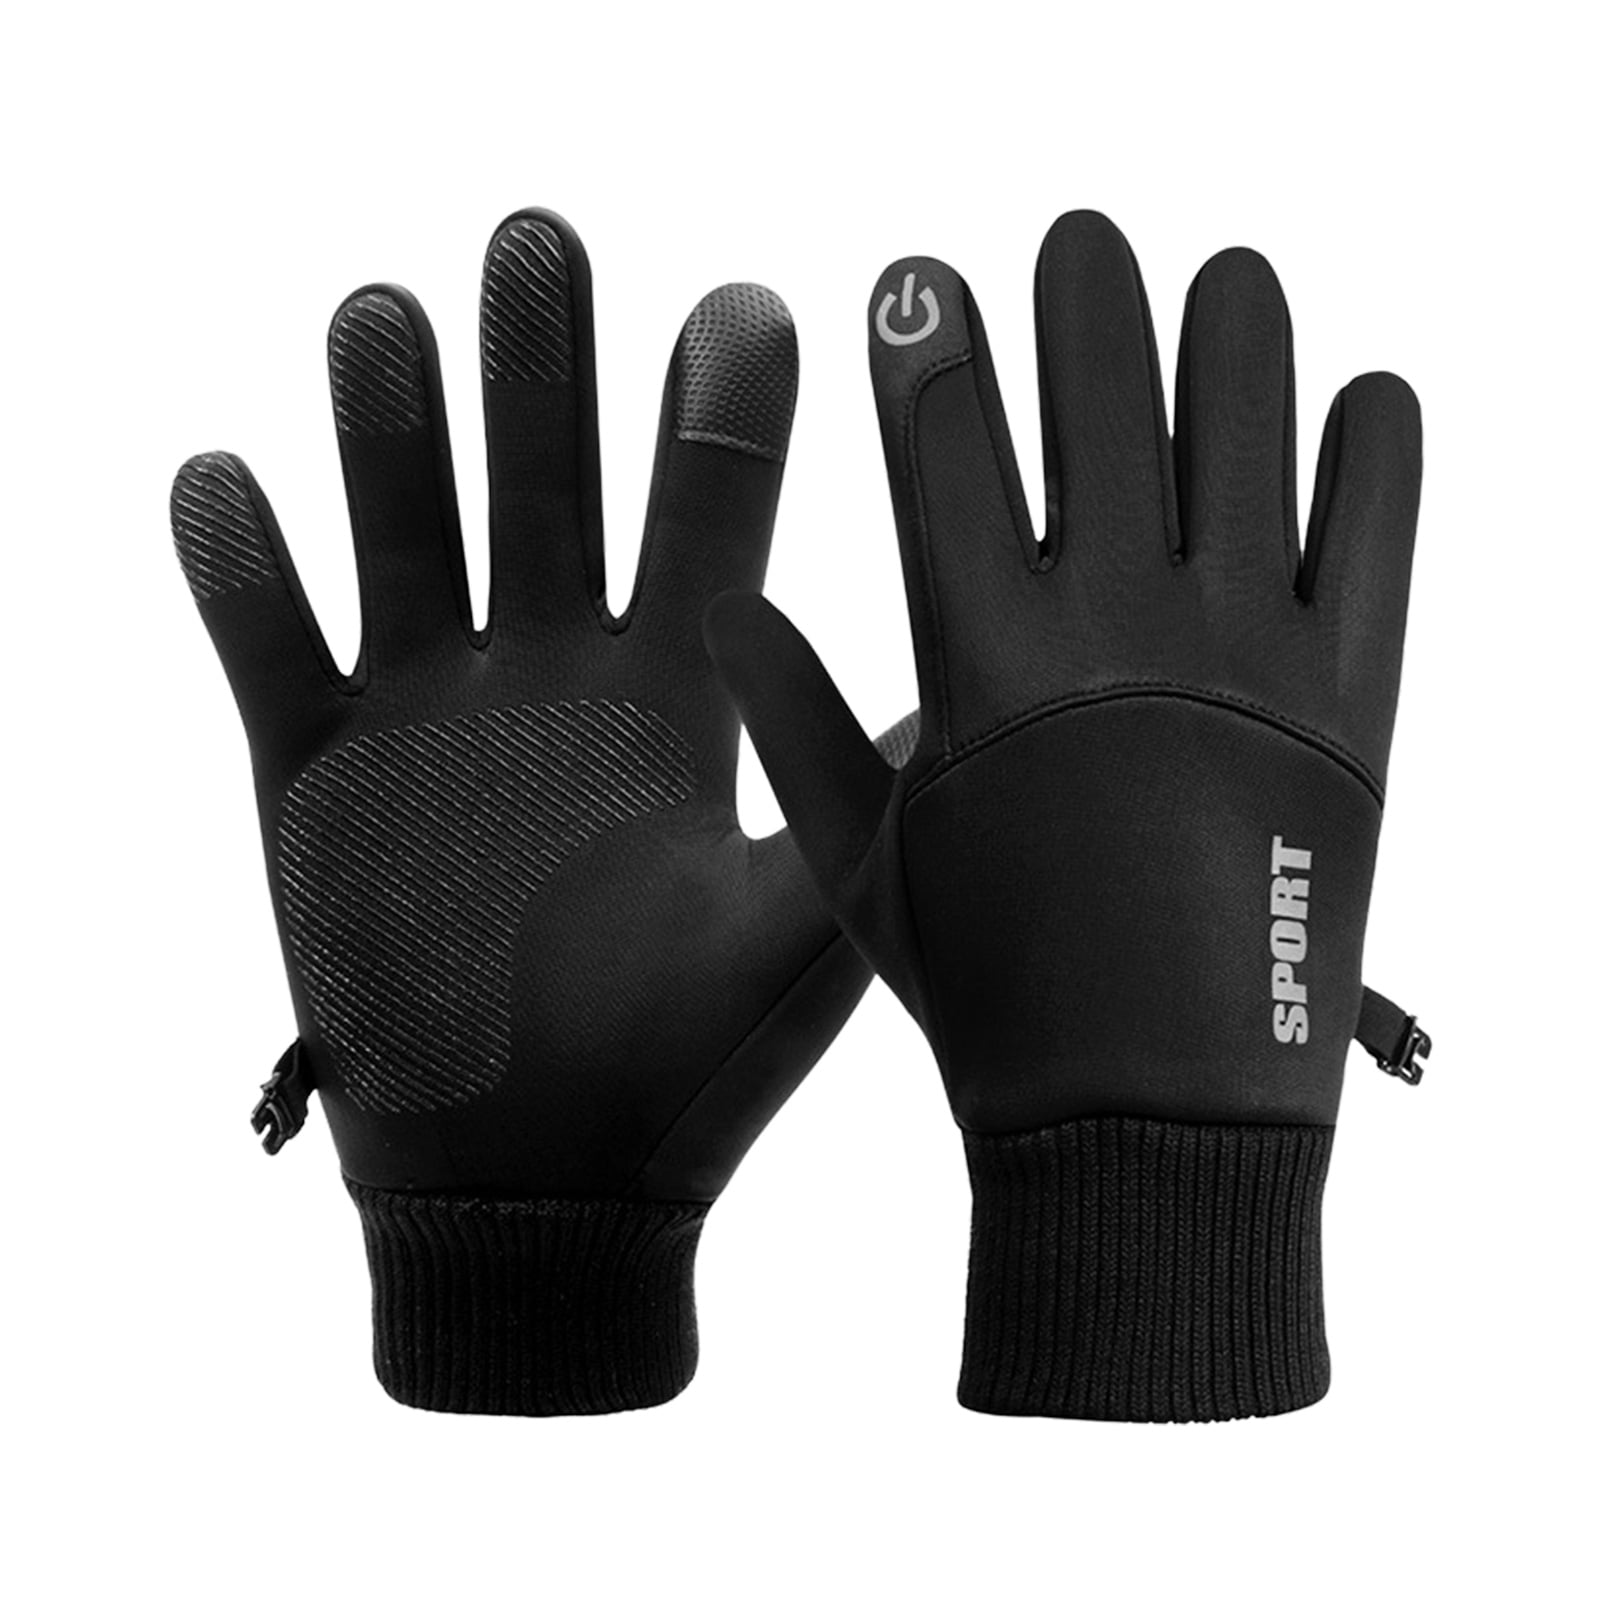 Winter Warm Touchscreen Gloves Windproof Waterproof Anti-Slip Cold Weather Gloves for Men and Women 